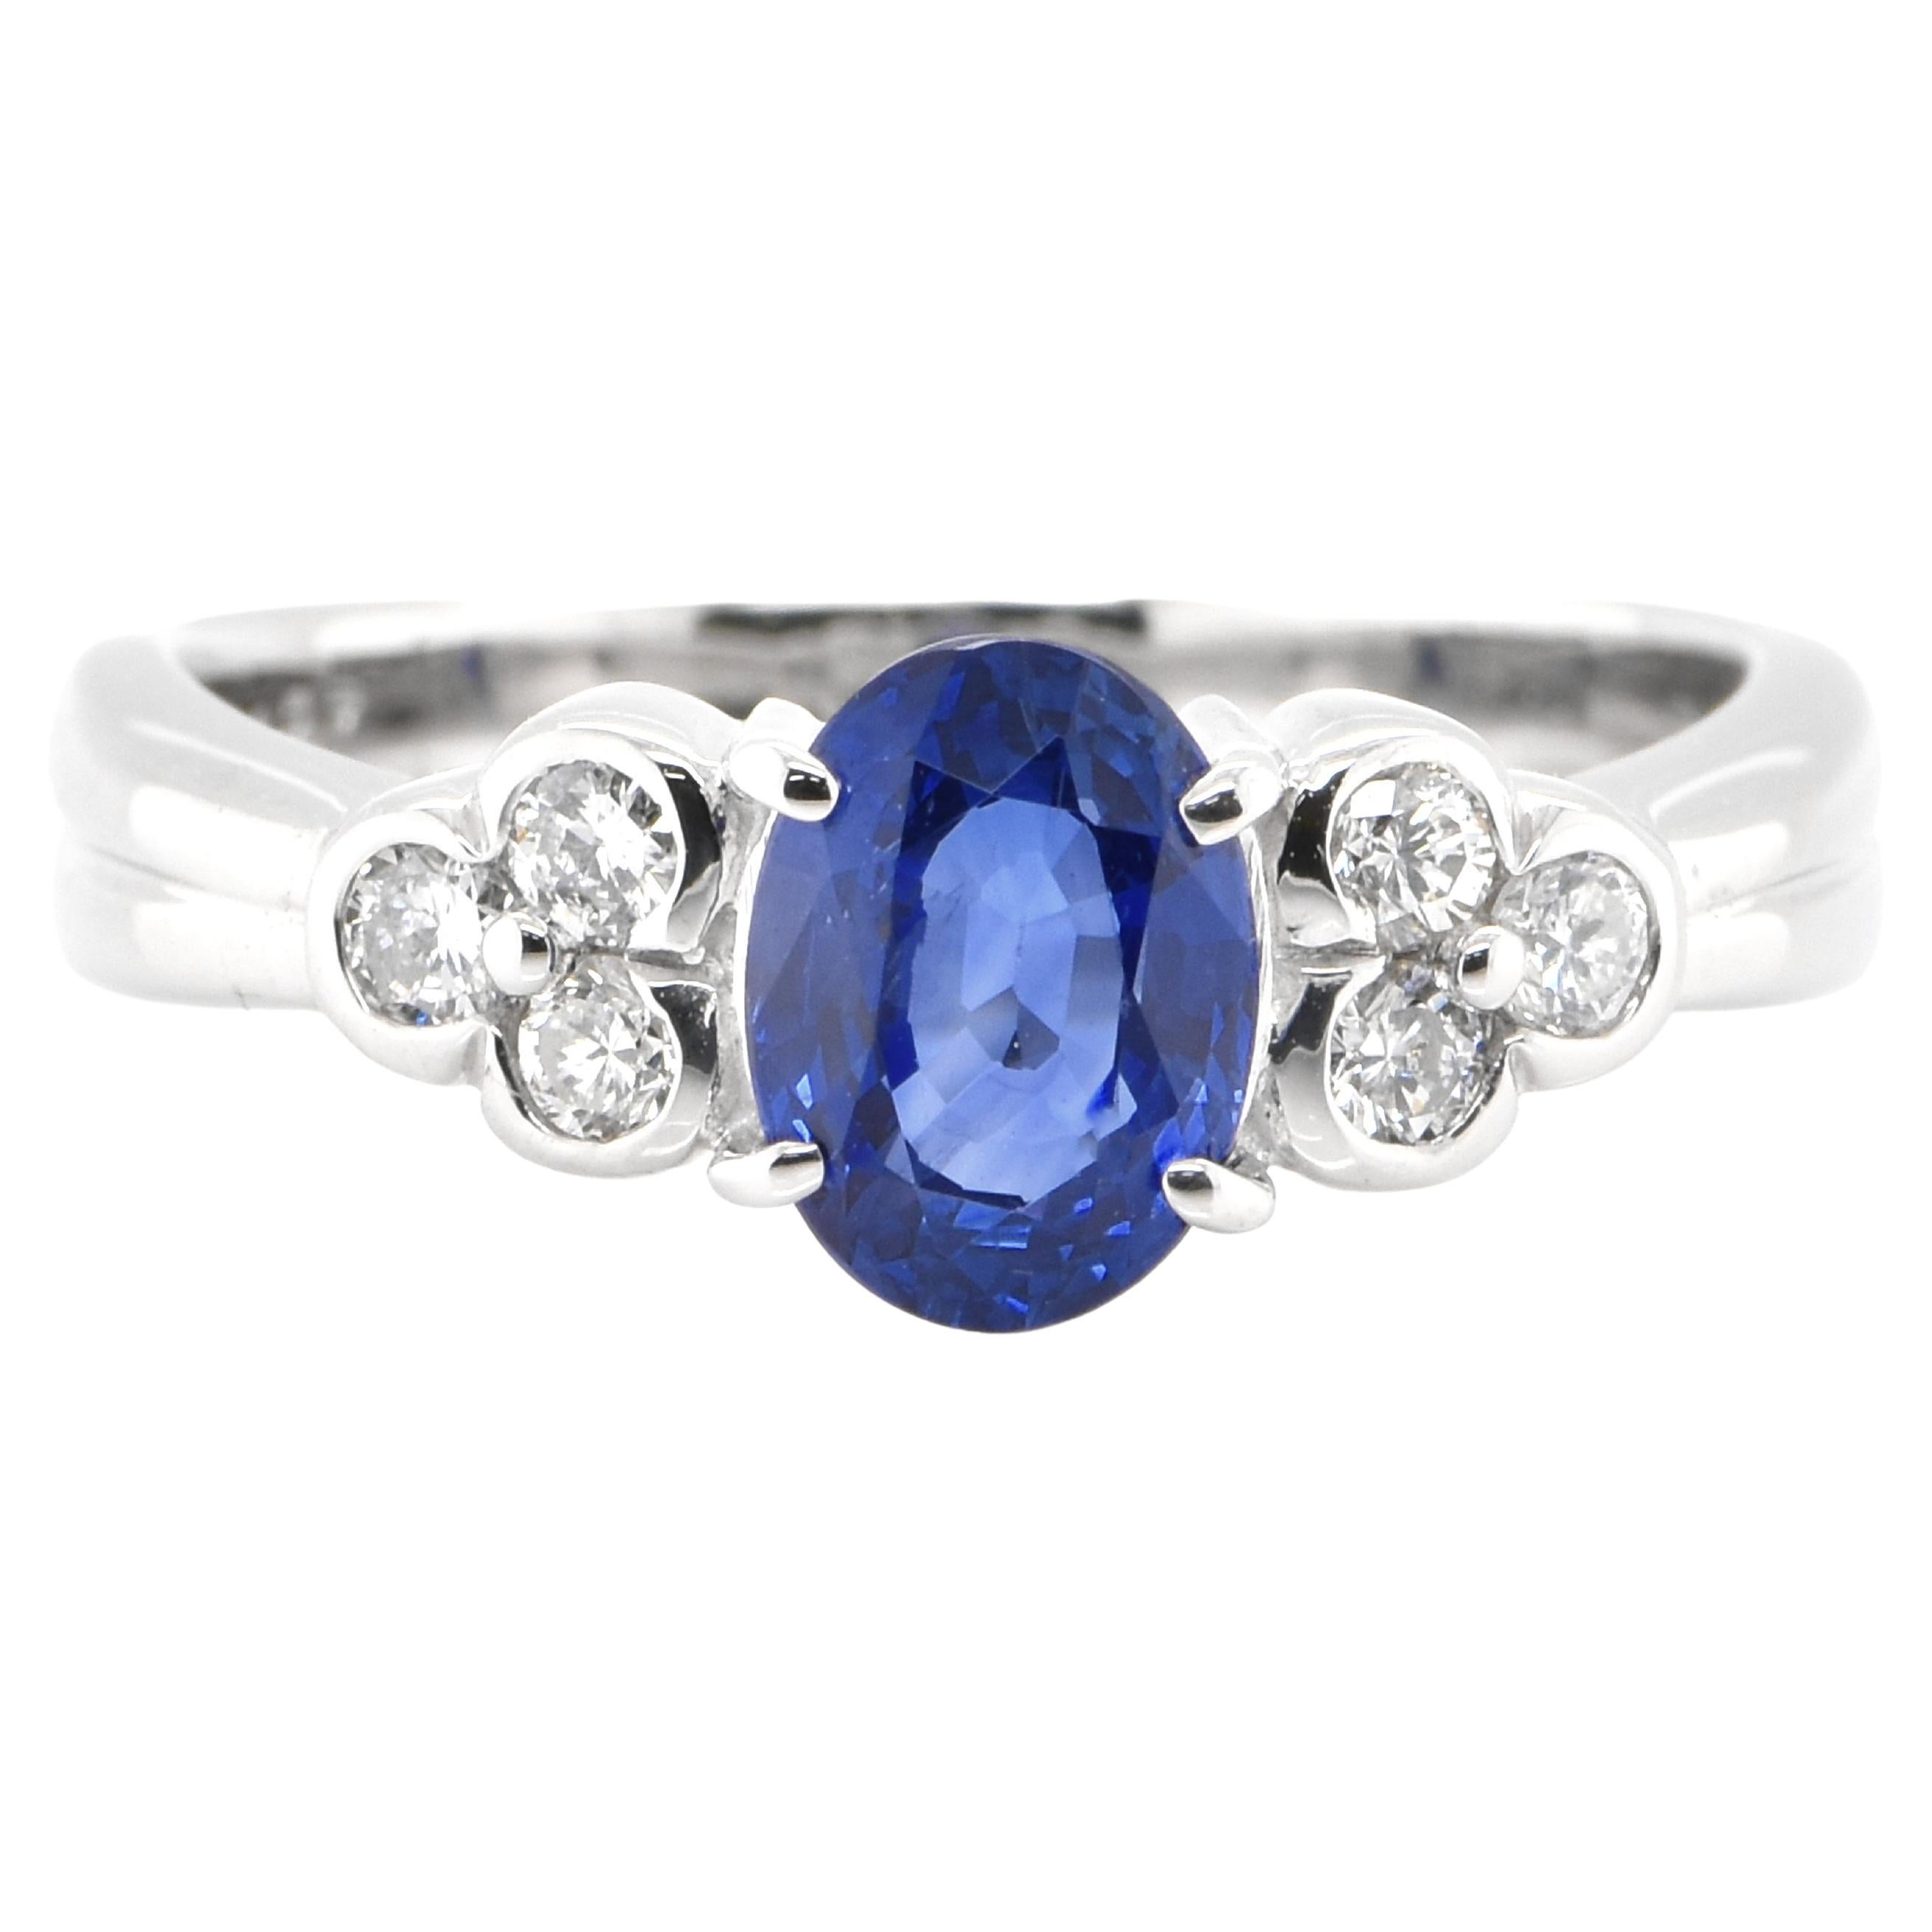 1.27 Carat Natural Blue Sapphire and Diamond Ring Made in Platinum